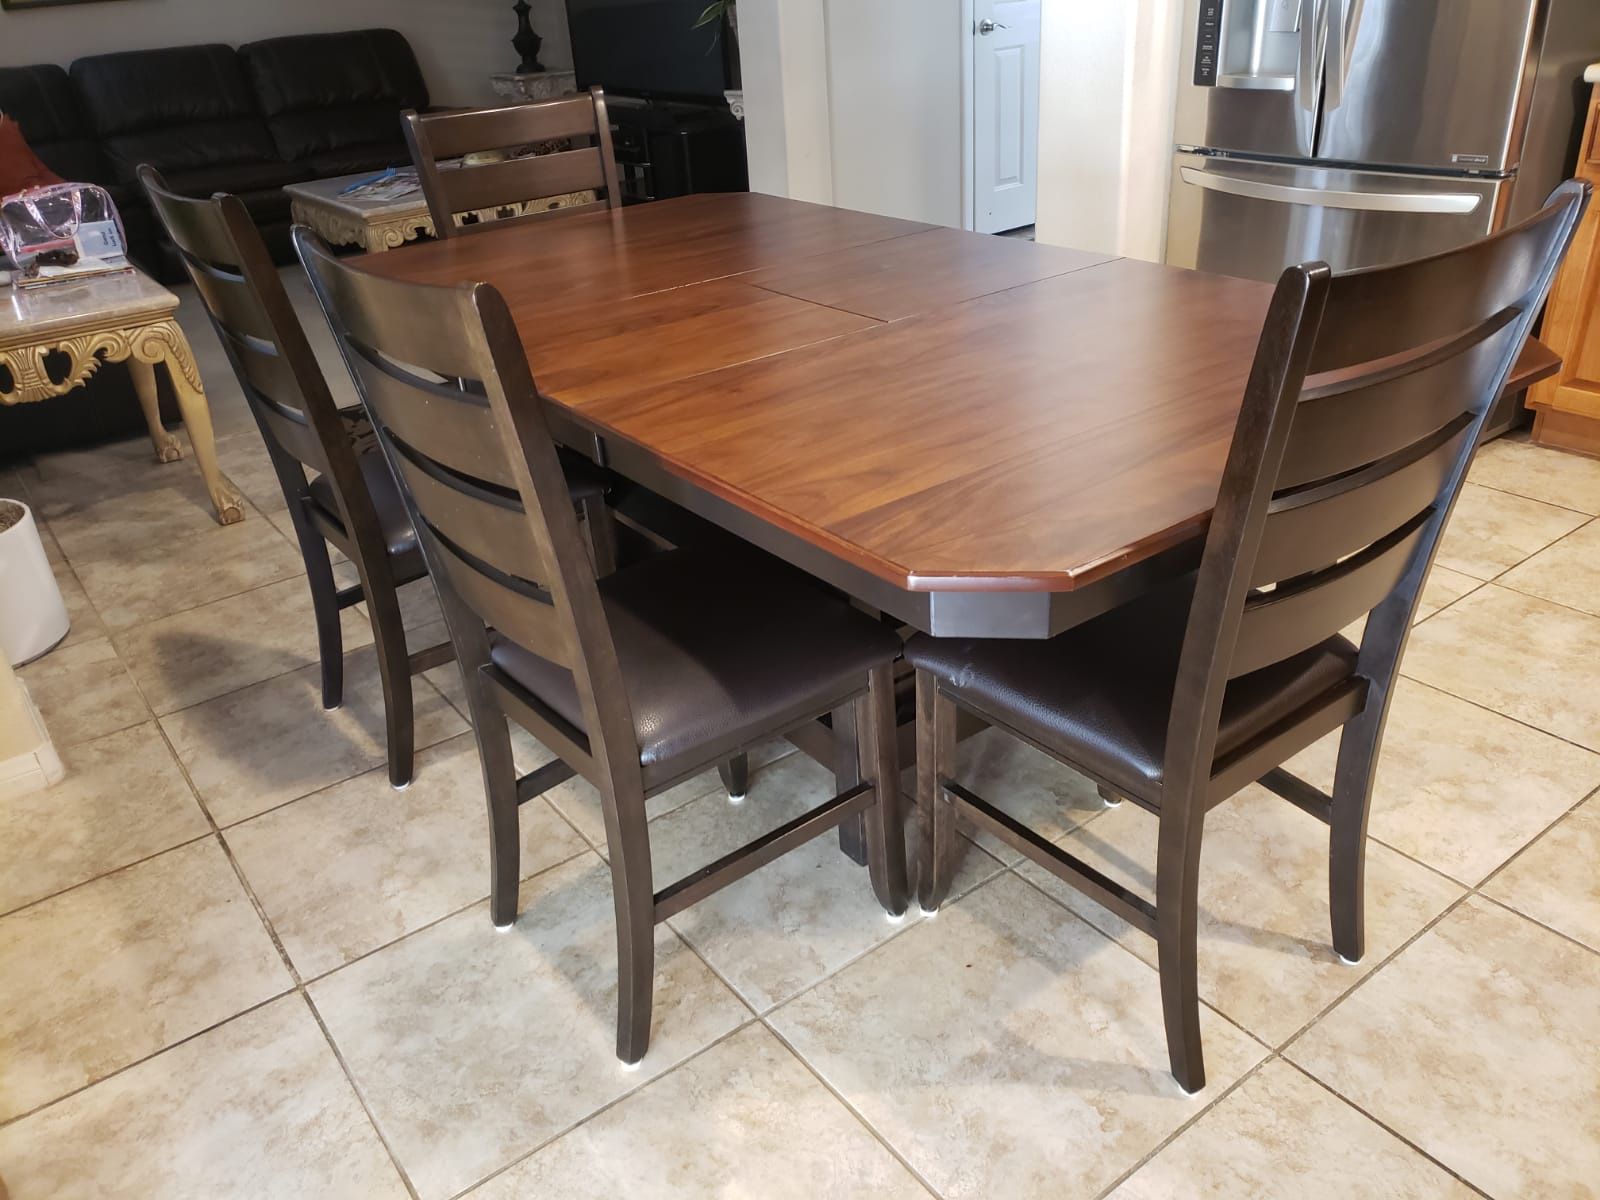 Price reduced! Dining table in absolute great condition for sale!